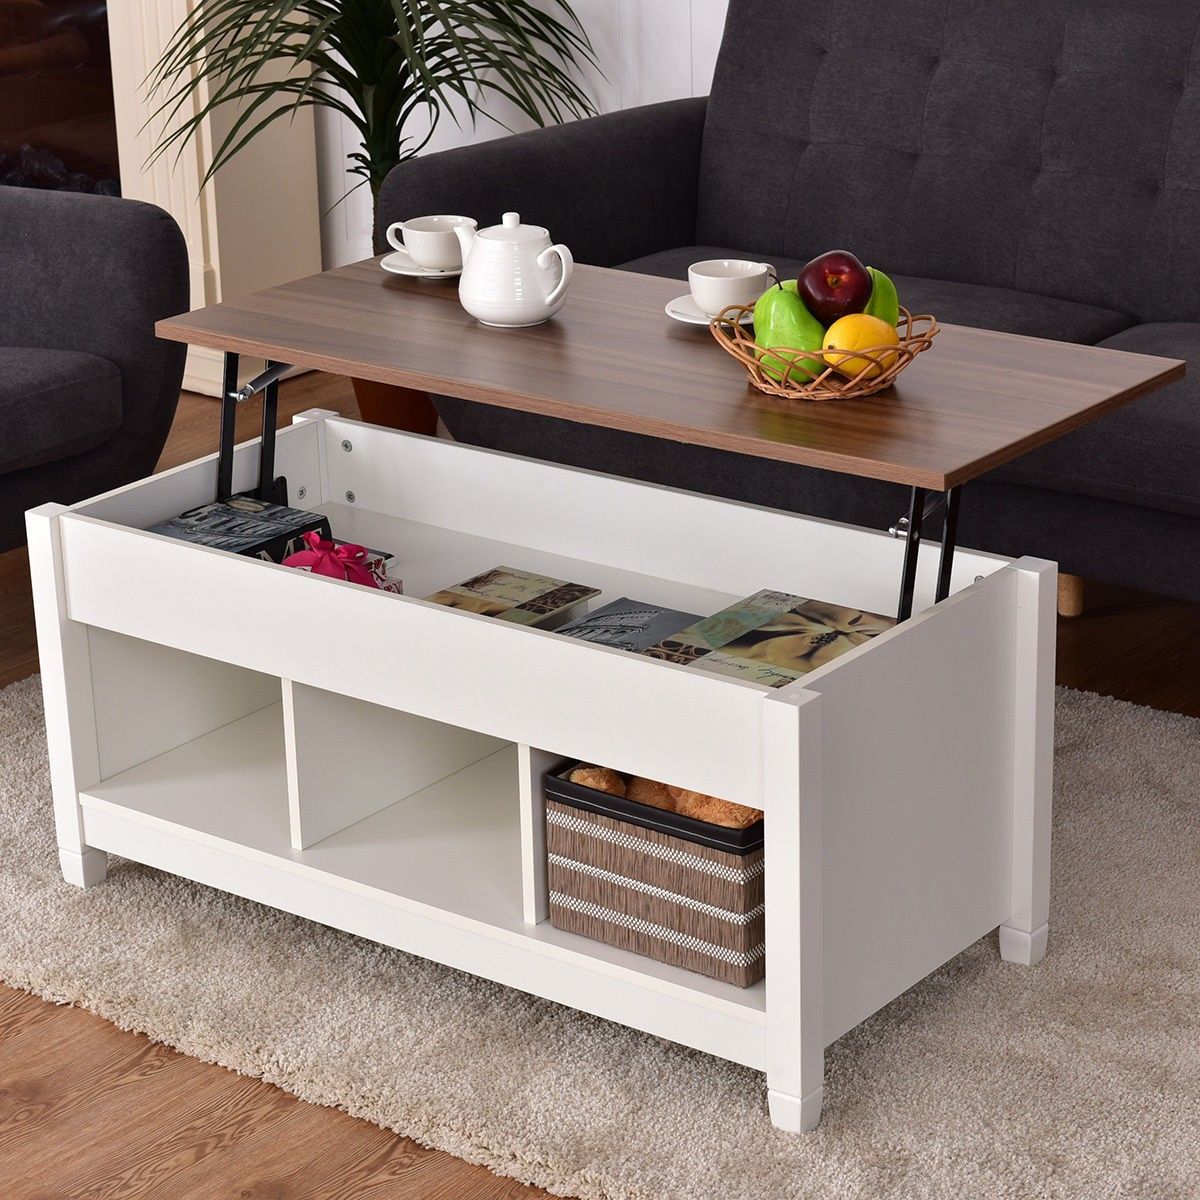 Lift Top Coffee Table With Hidden Storage Compartment Home Living Room For Lift Top Coffee Tables With Hidden Storage Compartments (View 11 of 20)